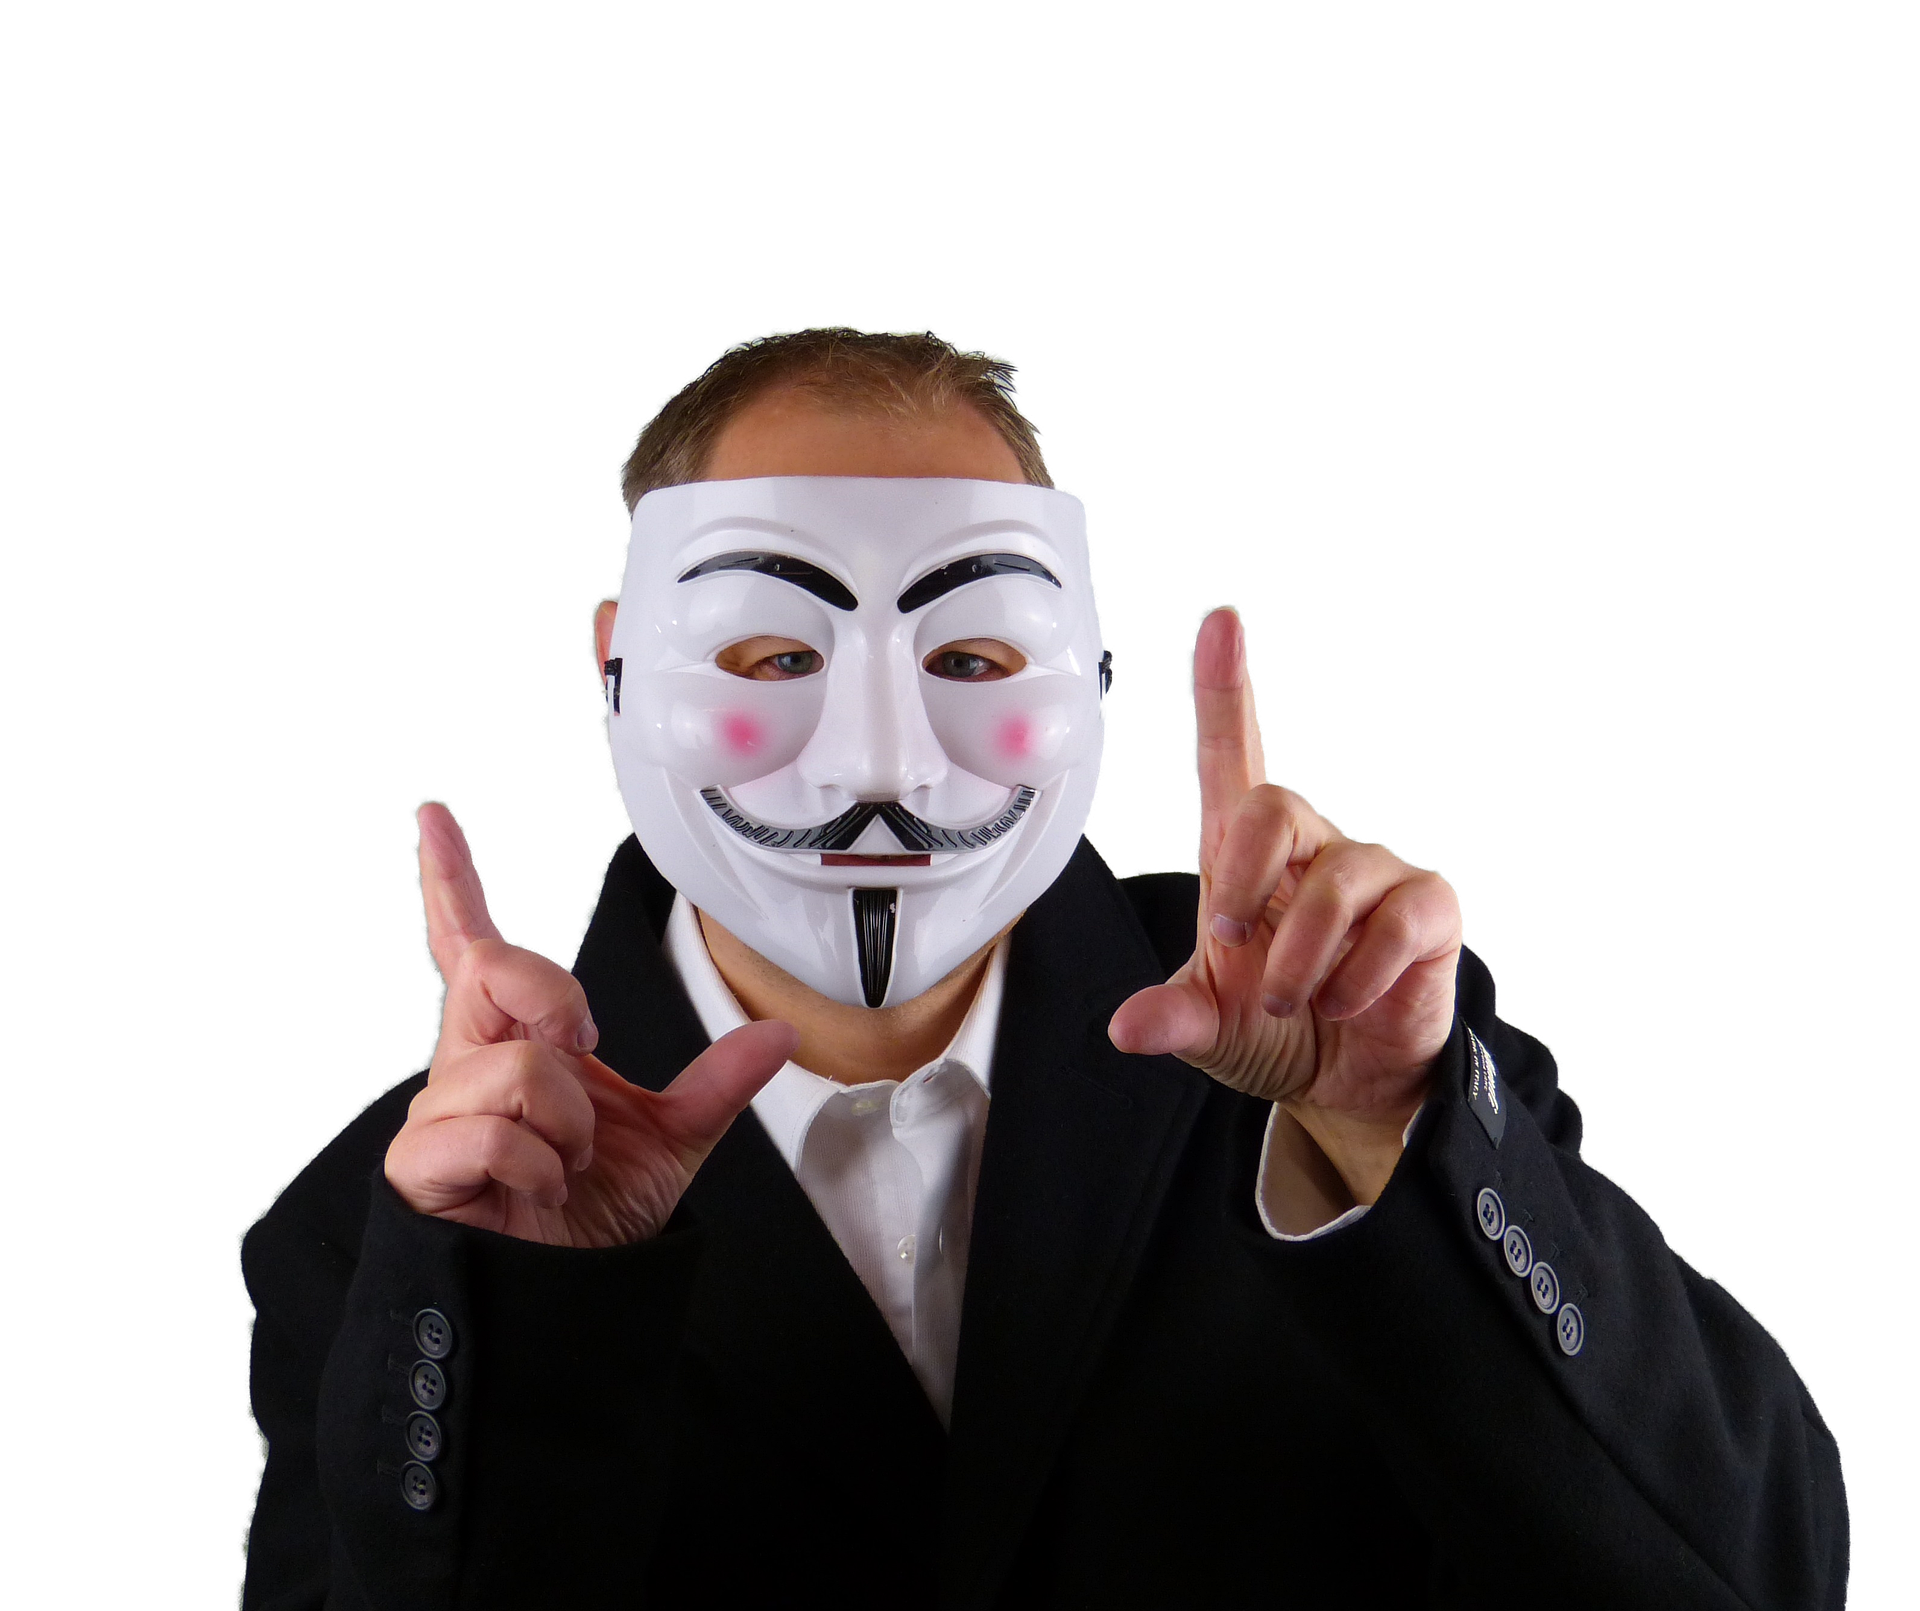 Man in a Guy Fawkes mask pointing upwards with both hands